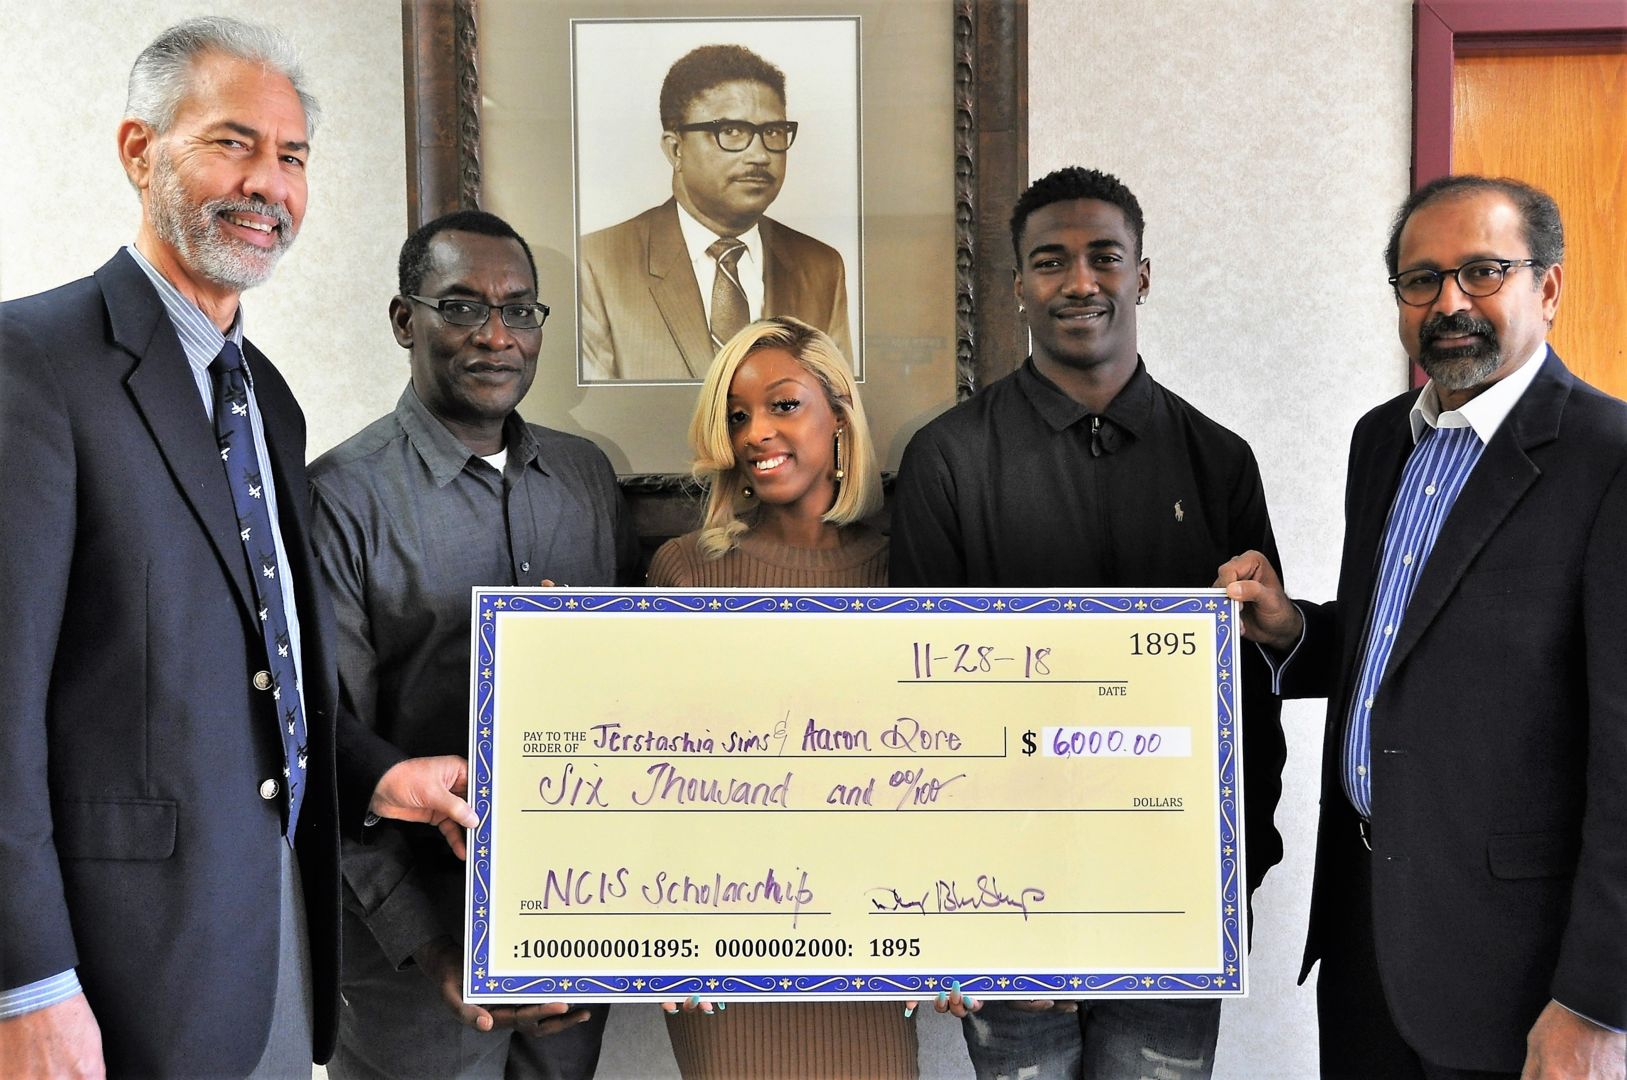 Fort Valley State University seniors Jerstashia Sims and Aaron Dore (center) accept $3,000 each from the National Crop Insurance Services (NCIS). They are pictured with (from left to right) Dr. Daniel Blankenship, interim dean for the College of Agriculture, Family Sciences and Technology; Dr. Mohammed Ibrahim, coordinator and professor of the agricultural economics program; and Dr. Govind Kannan, associate dean for research.